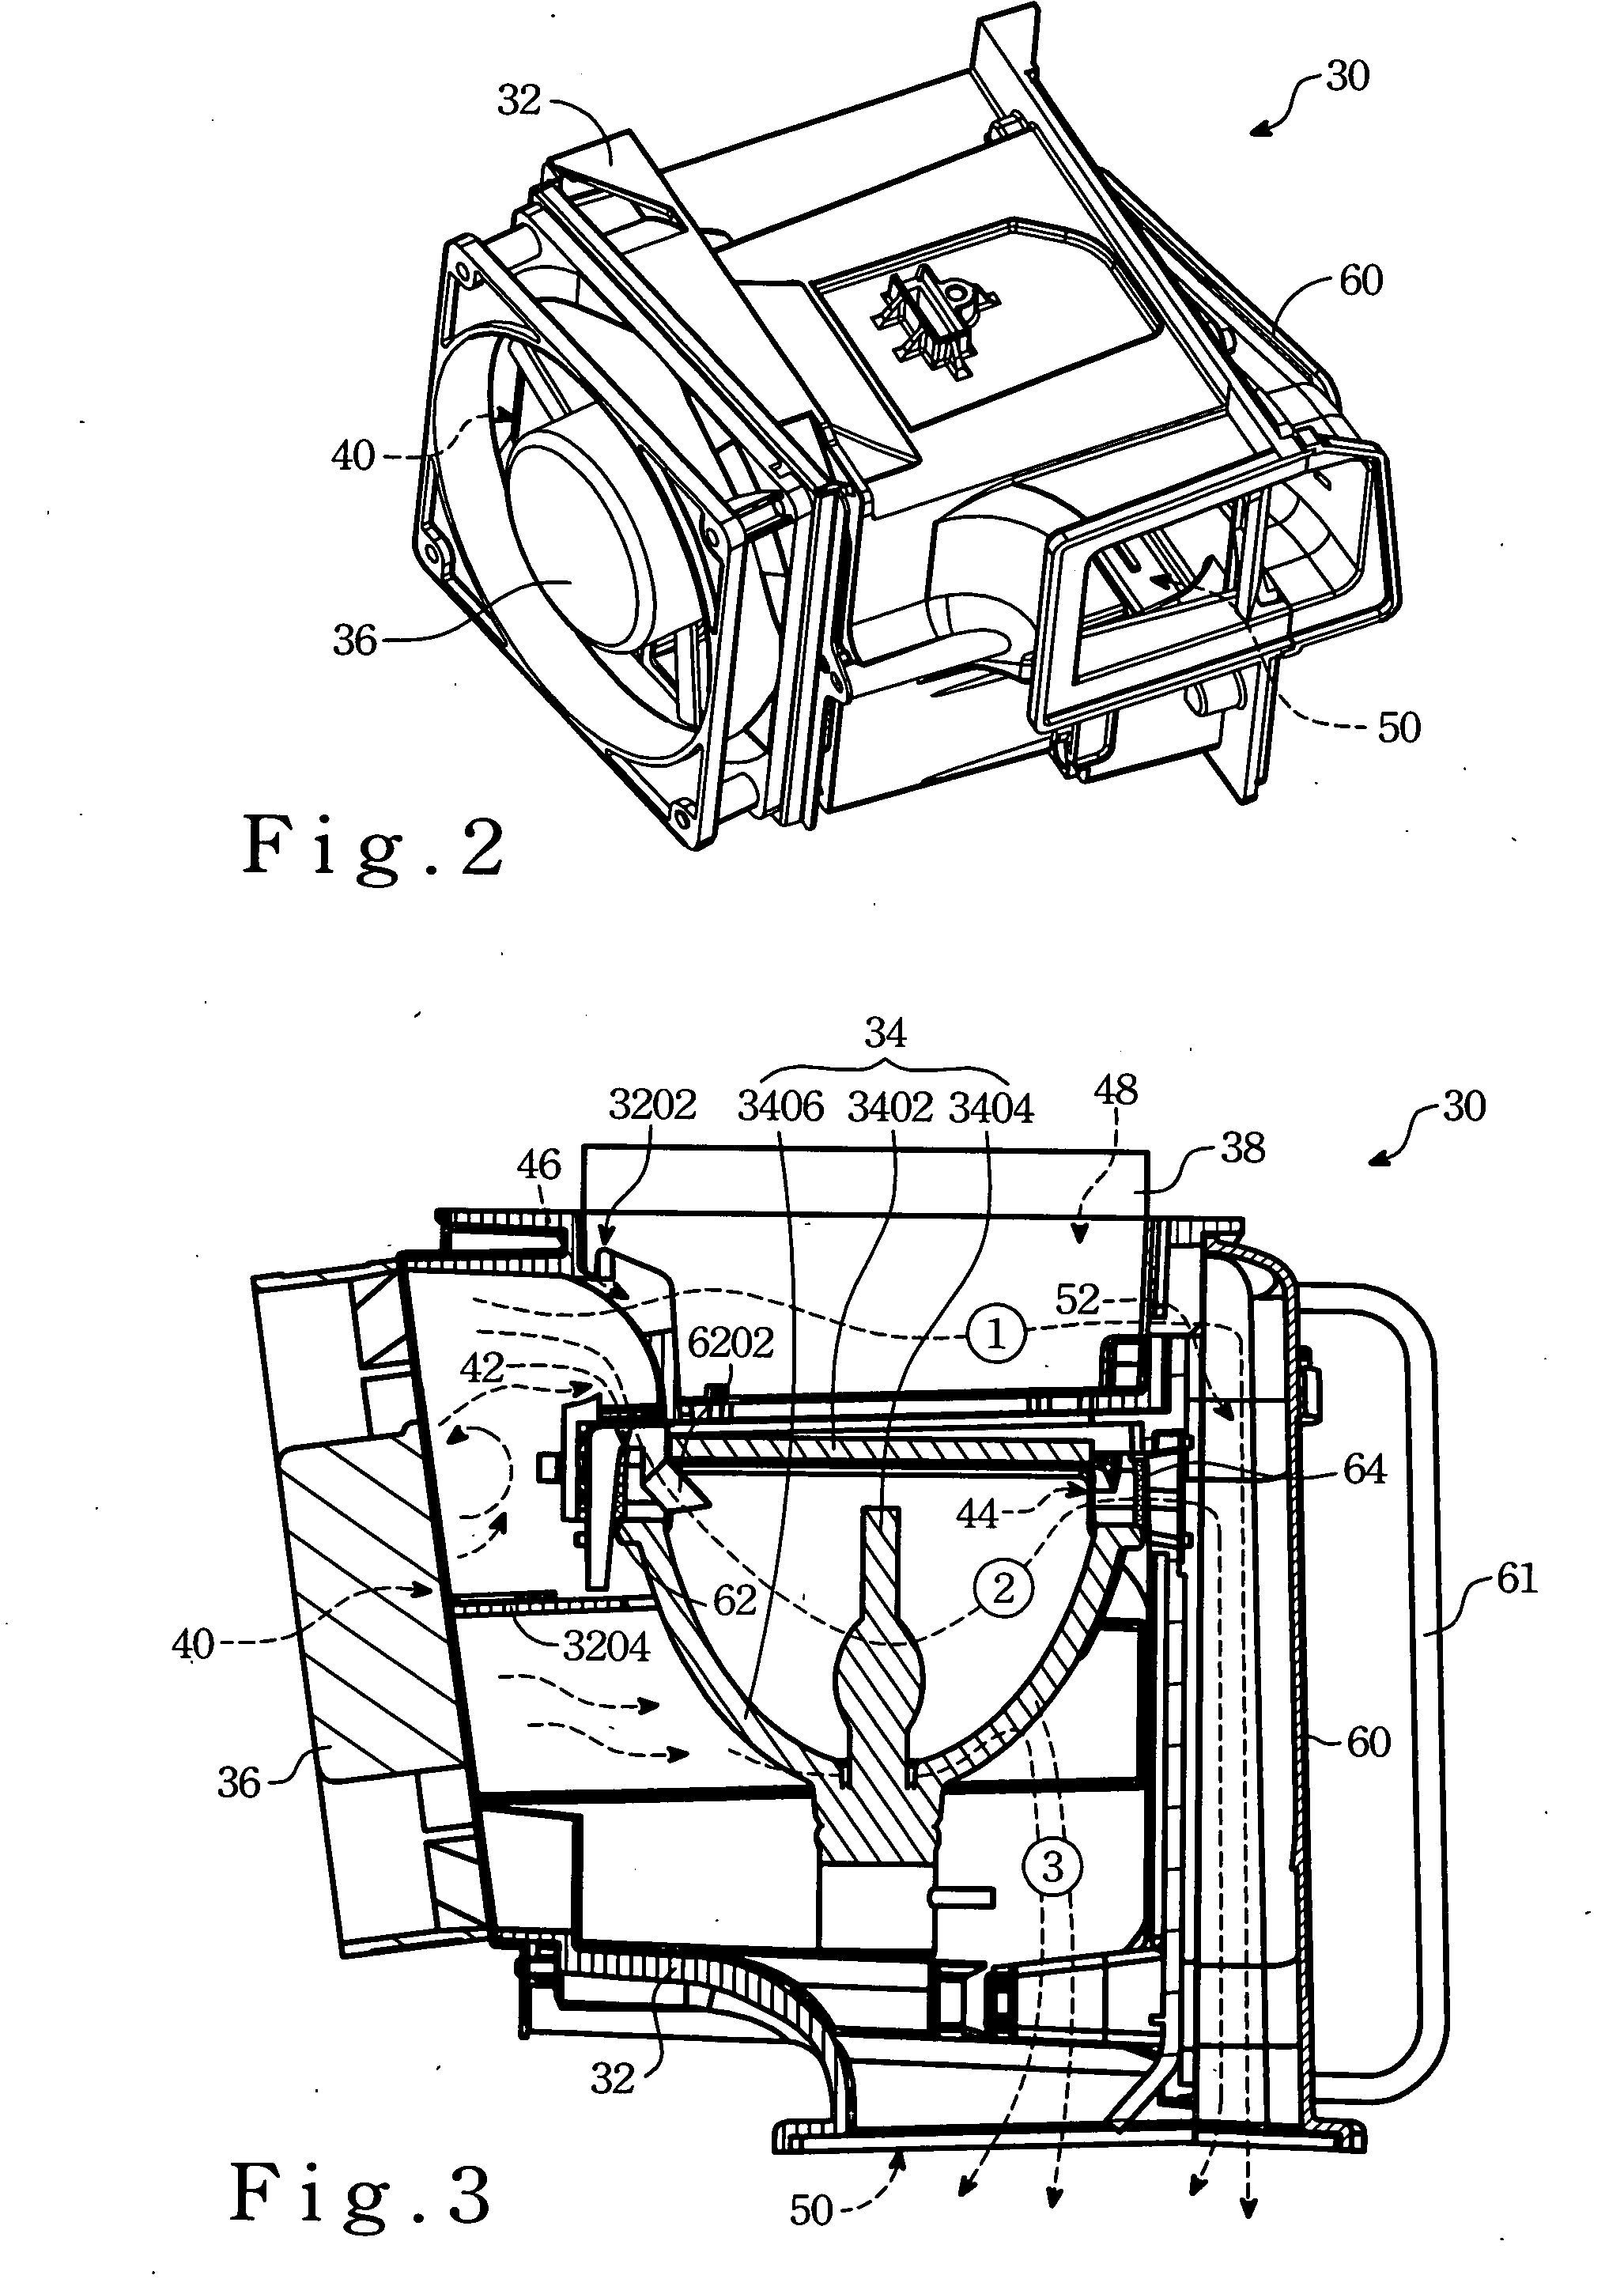 Heat-dissipating device for a projection apparatus